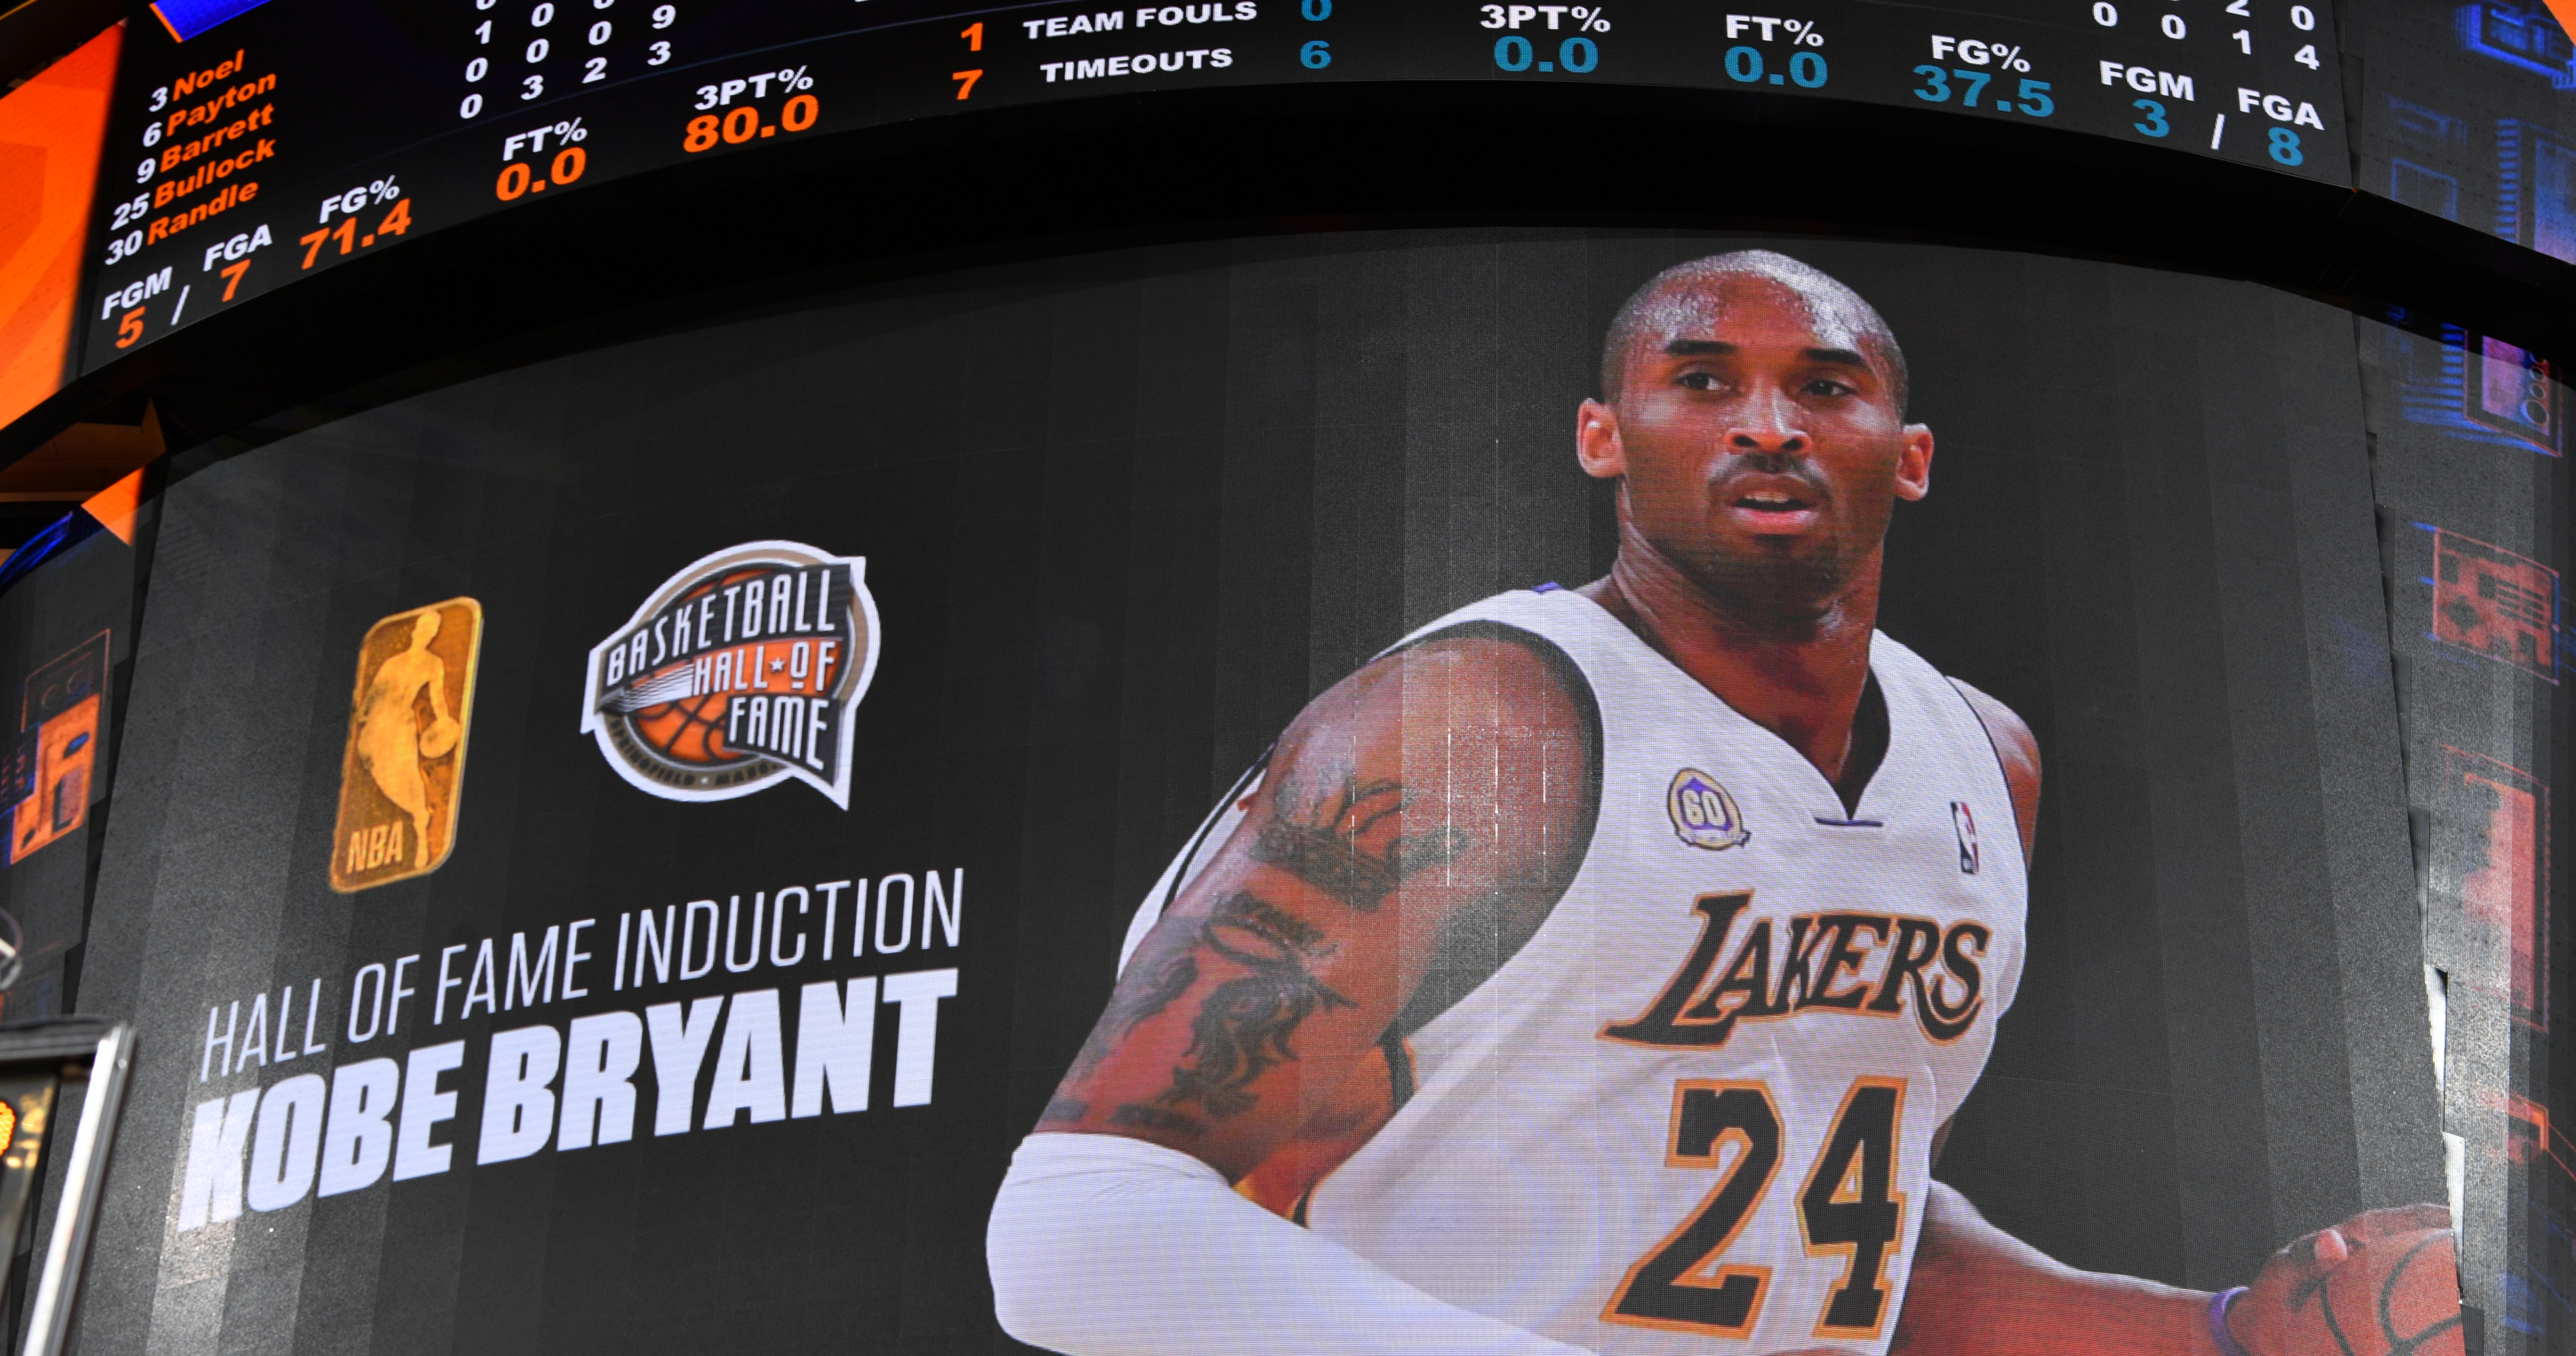 Jersey worn by Kobe Bryant in rookie playoffs sold for millions